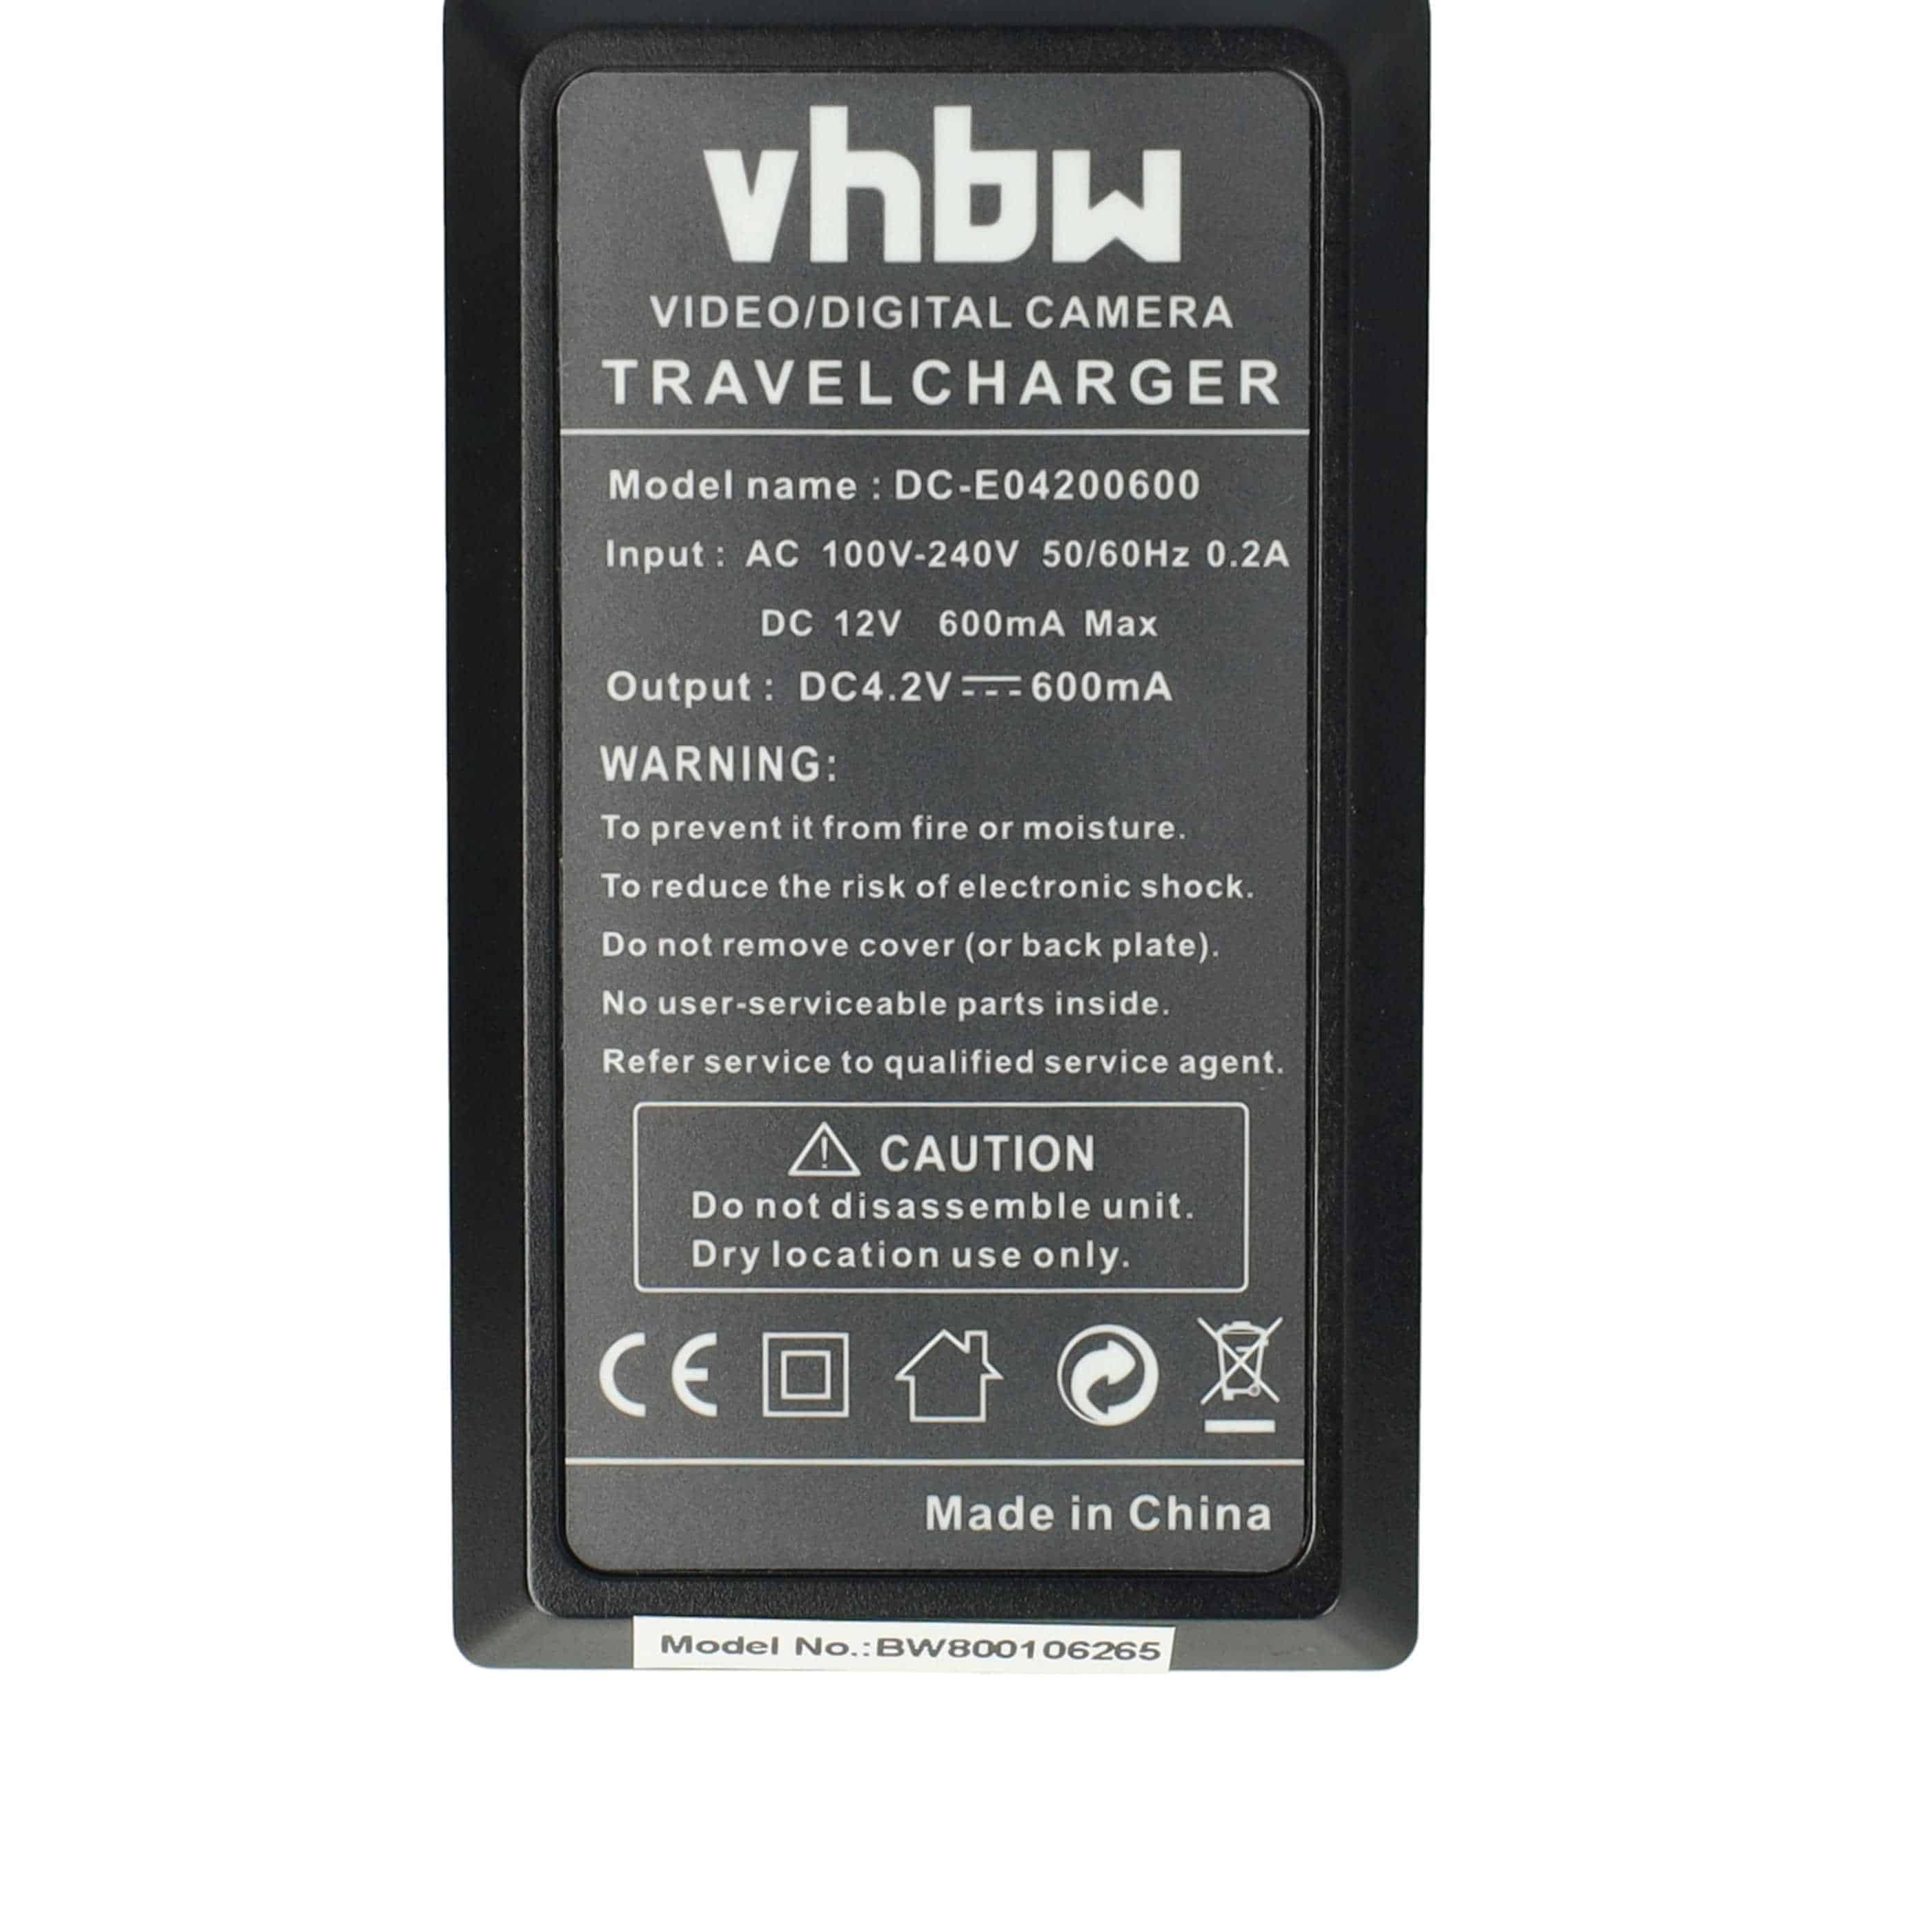 Battery Charger suitable for Camera etc. - 0.6 A, 4.2 V